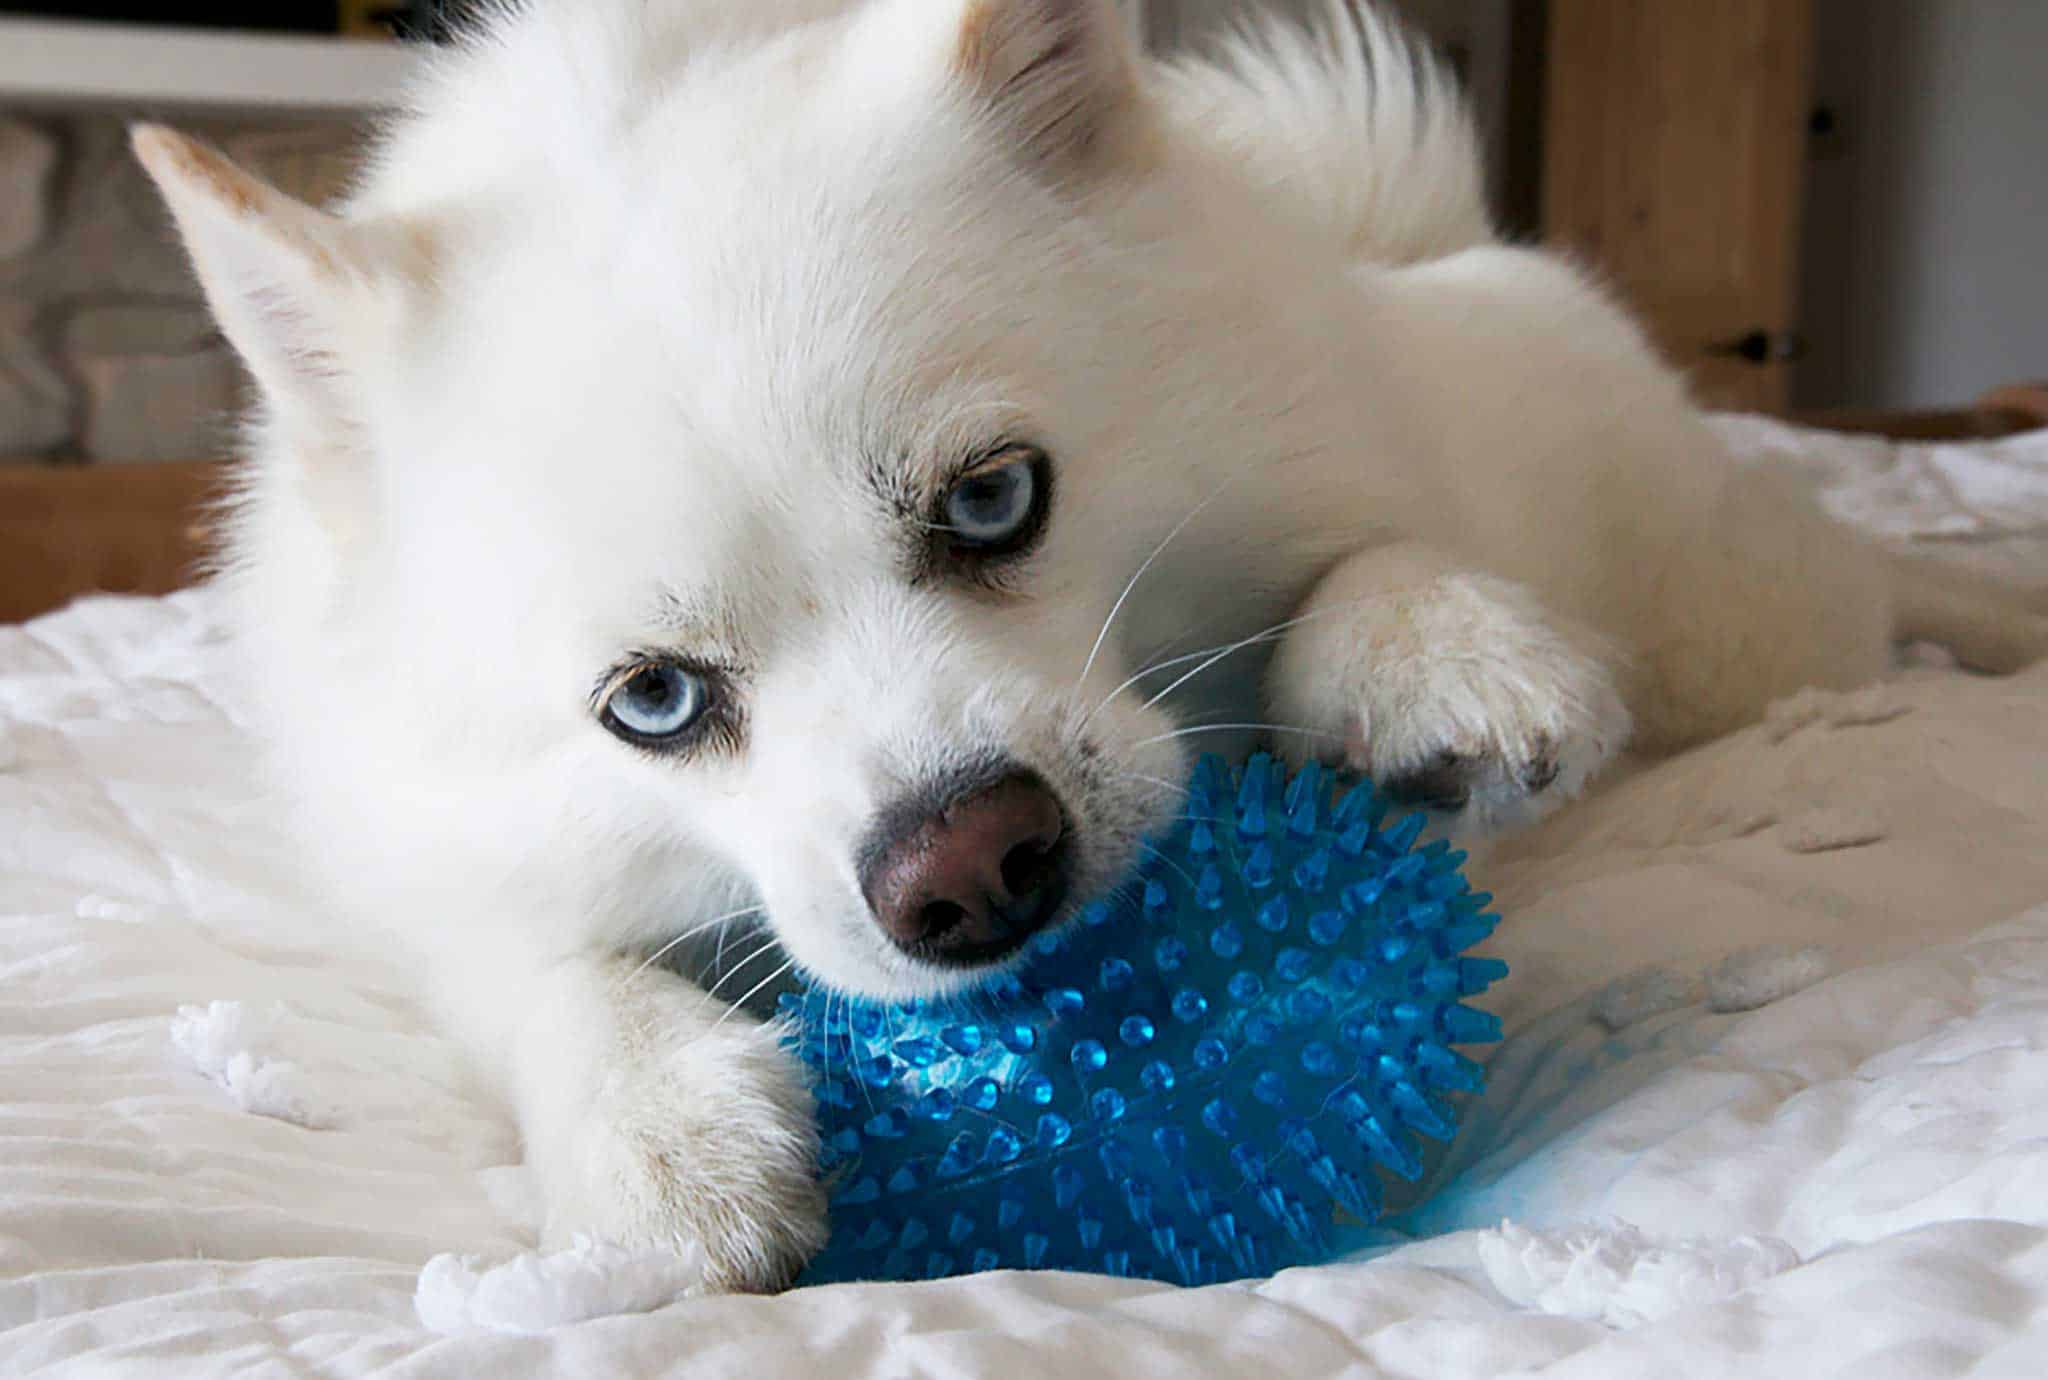 american eskimo dog is ill with infectious disease